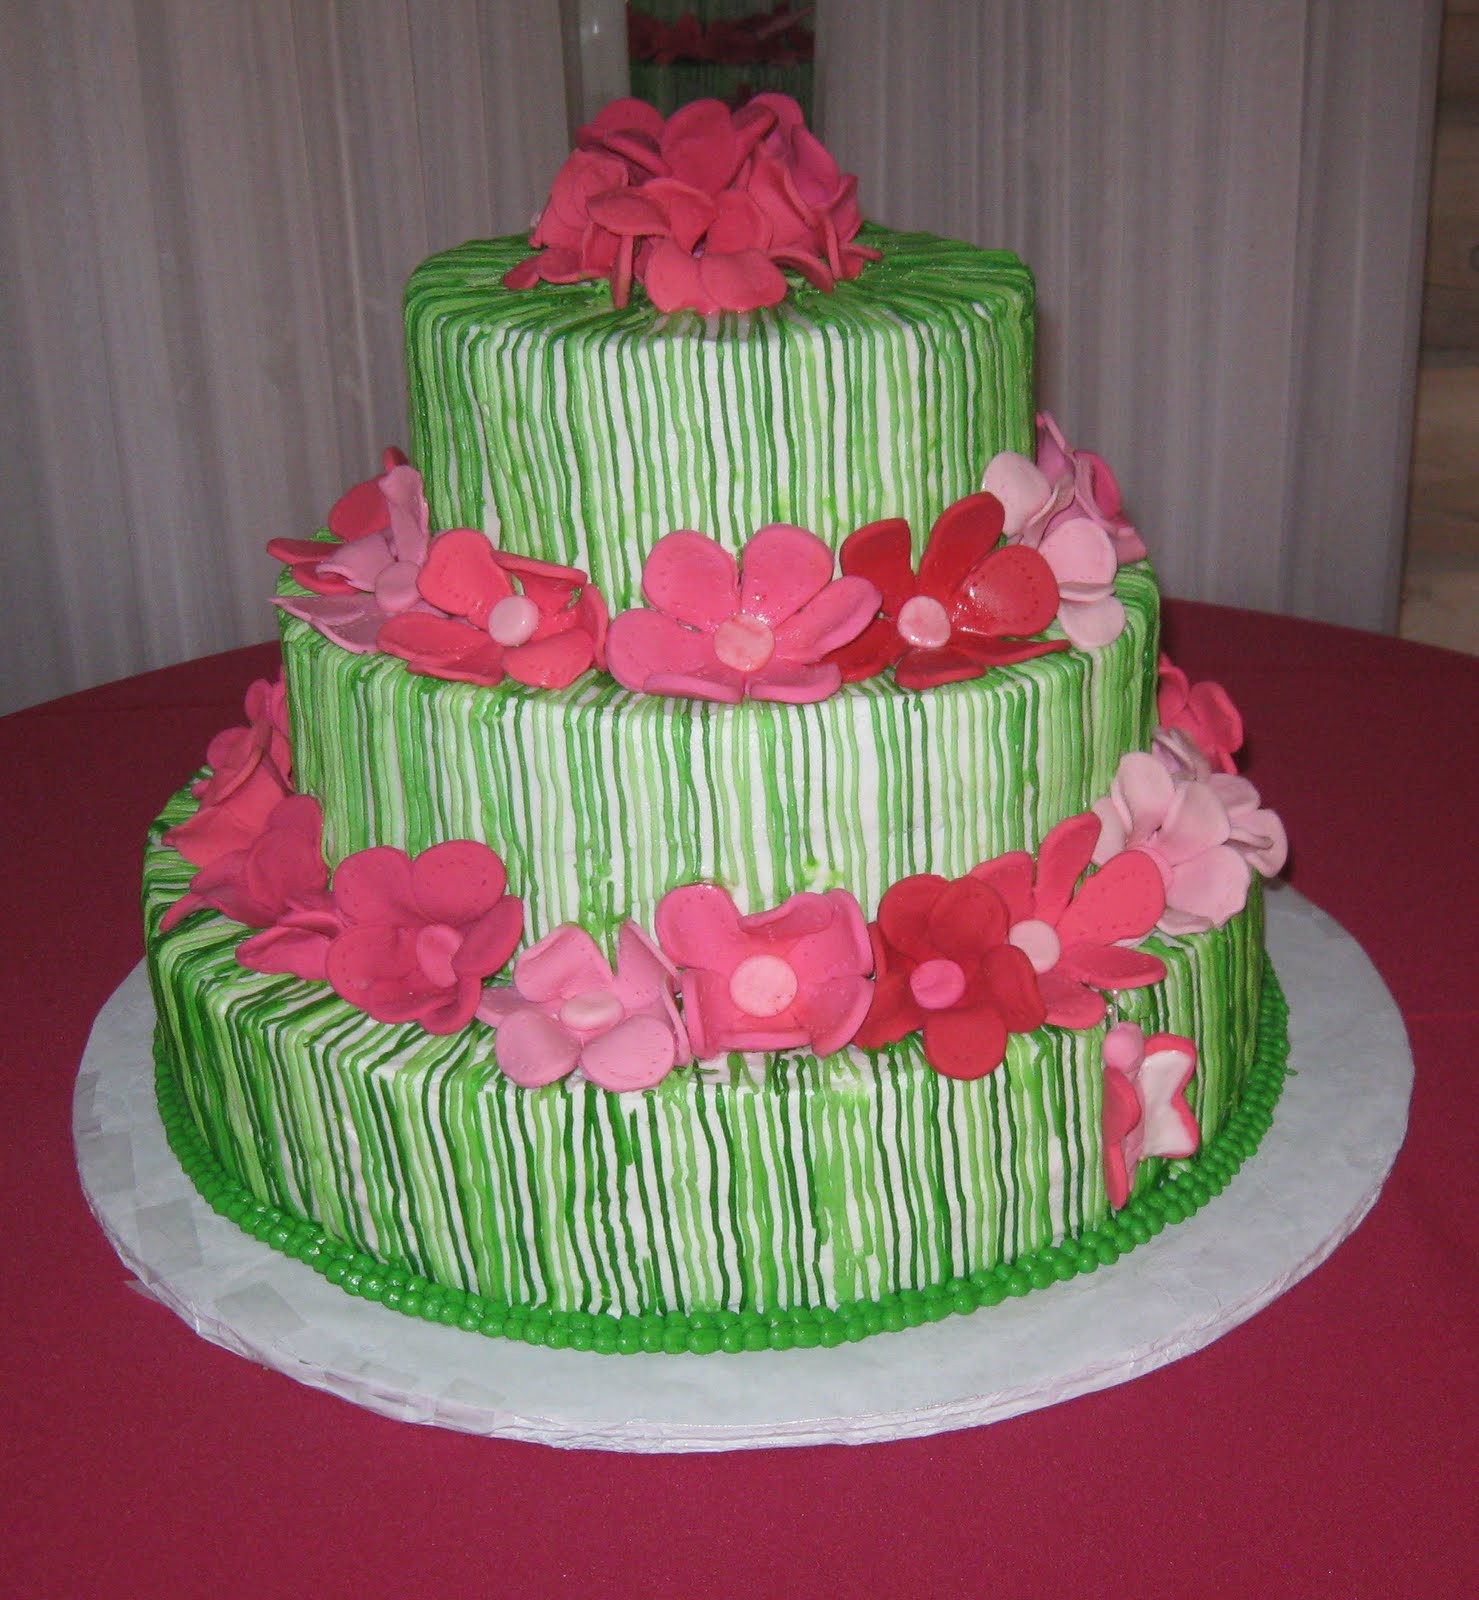 Pink And Green Wedding Cakes
 ChubbyHubbyCakes Pink and green wedding cake